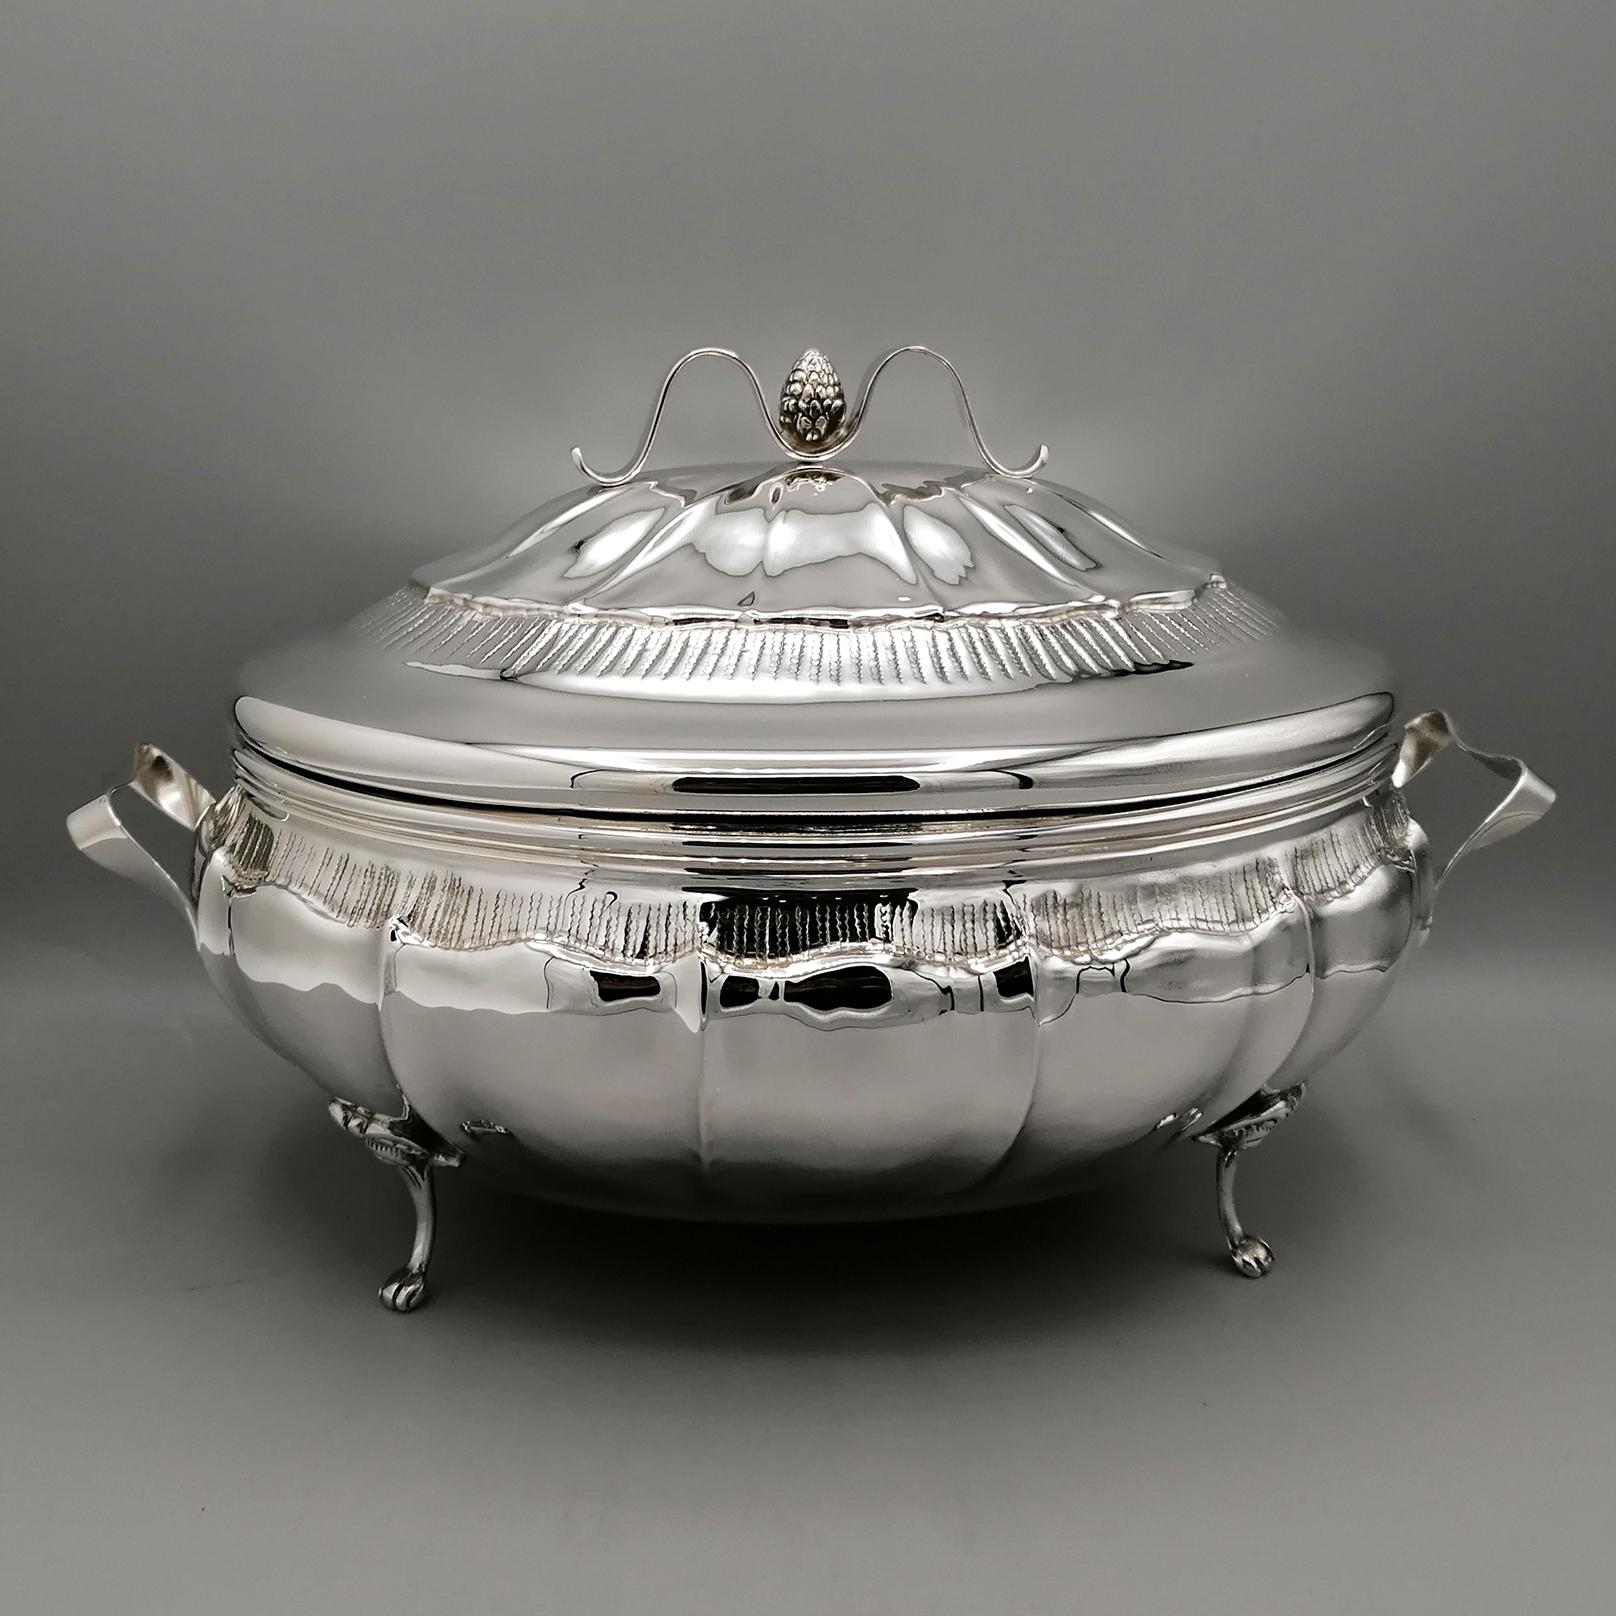 Baroque style oval tureen, made entirely by hand.
The baroque style of this tureen is very light with grooves typical of the style but not evident to allow the object to be easily placed in any type of furniture.
Its small size also allows it to be